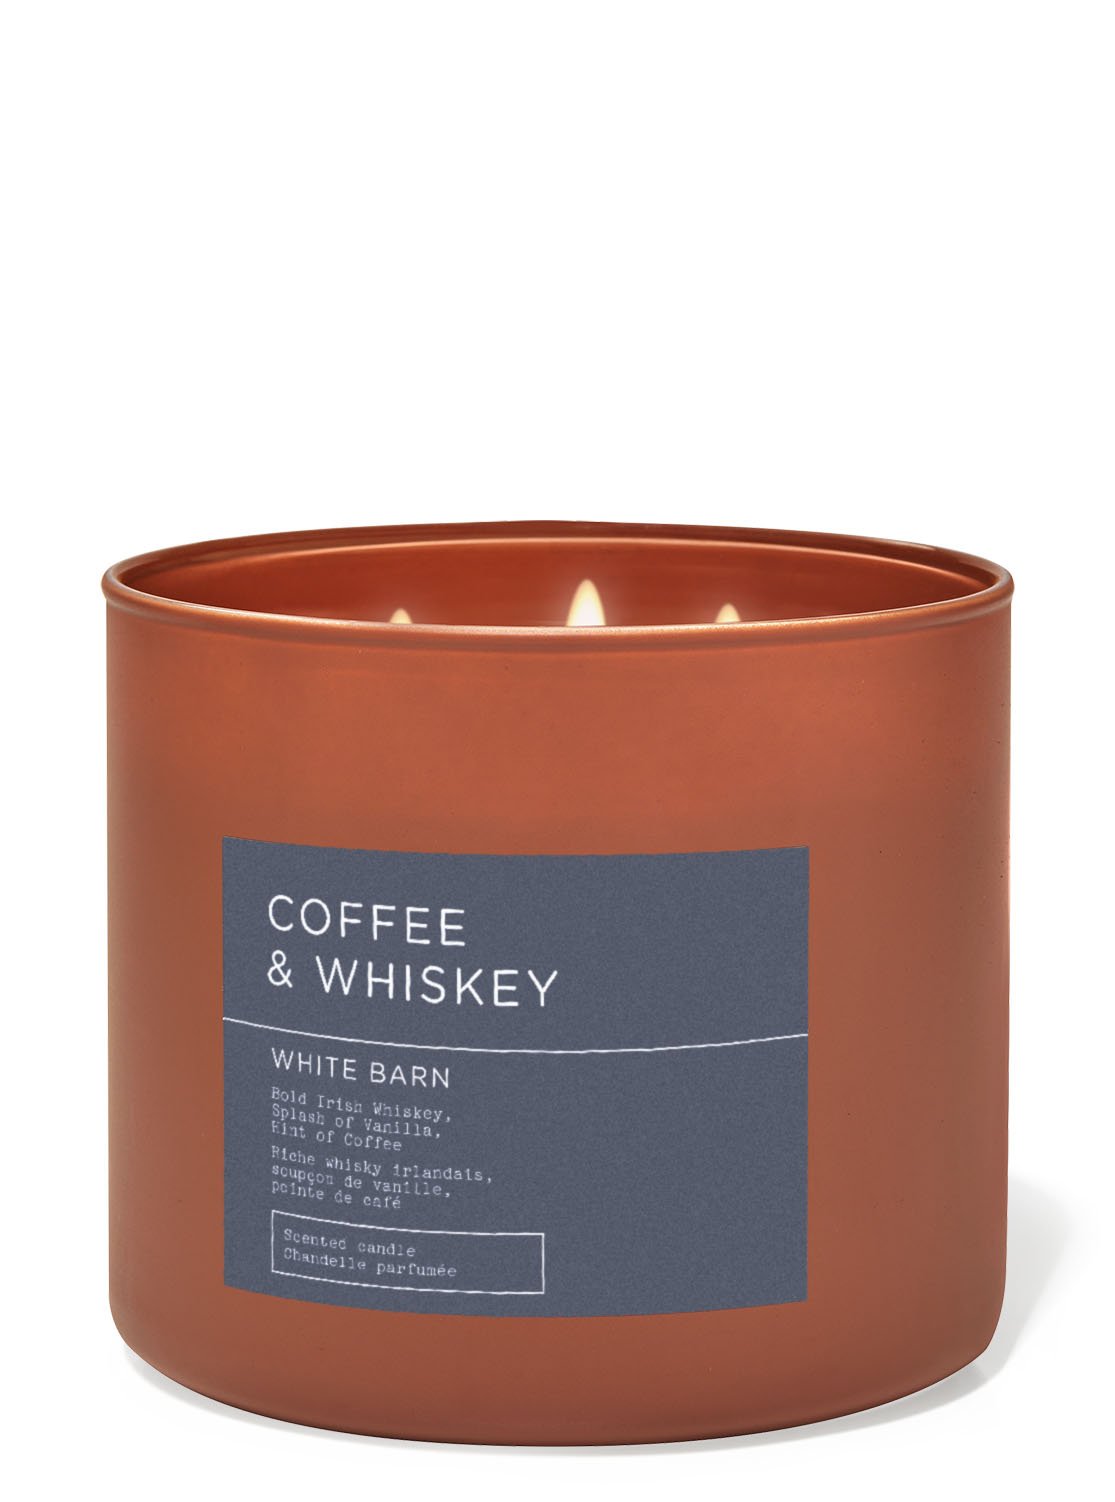 Coffee & Whiskey 3-Wick Candle | Bath and Body Works